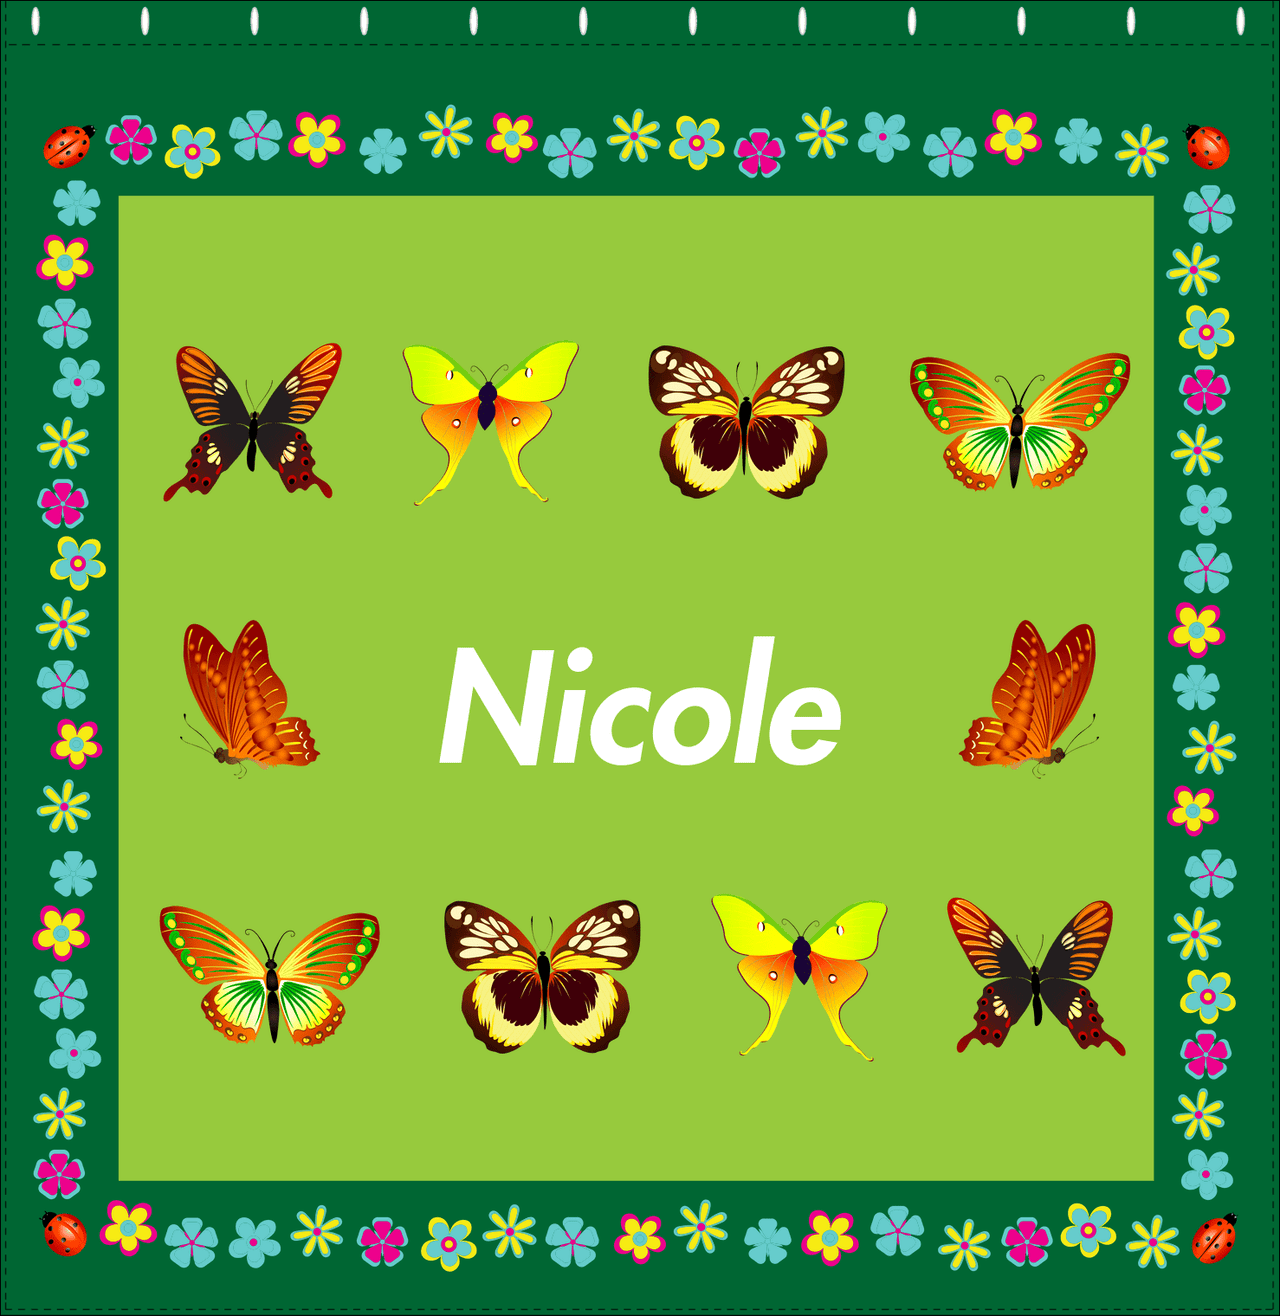 Personalized Butterfly Shower Curtain X - Green Background - Butterflies VII - Decorate View